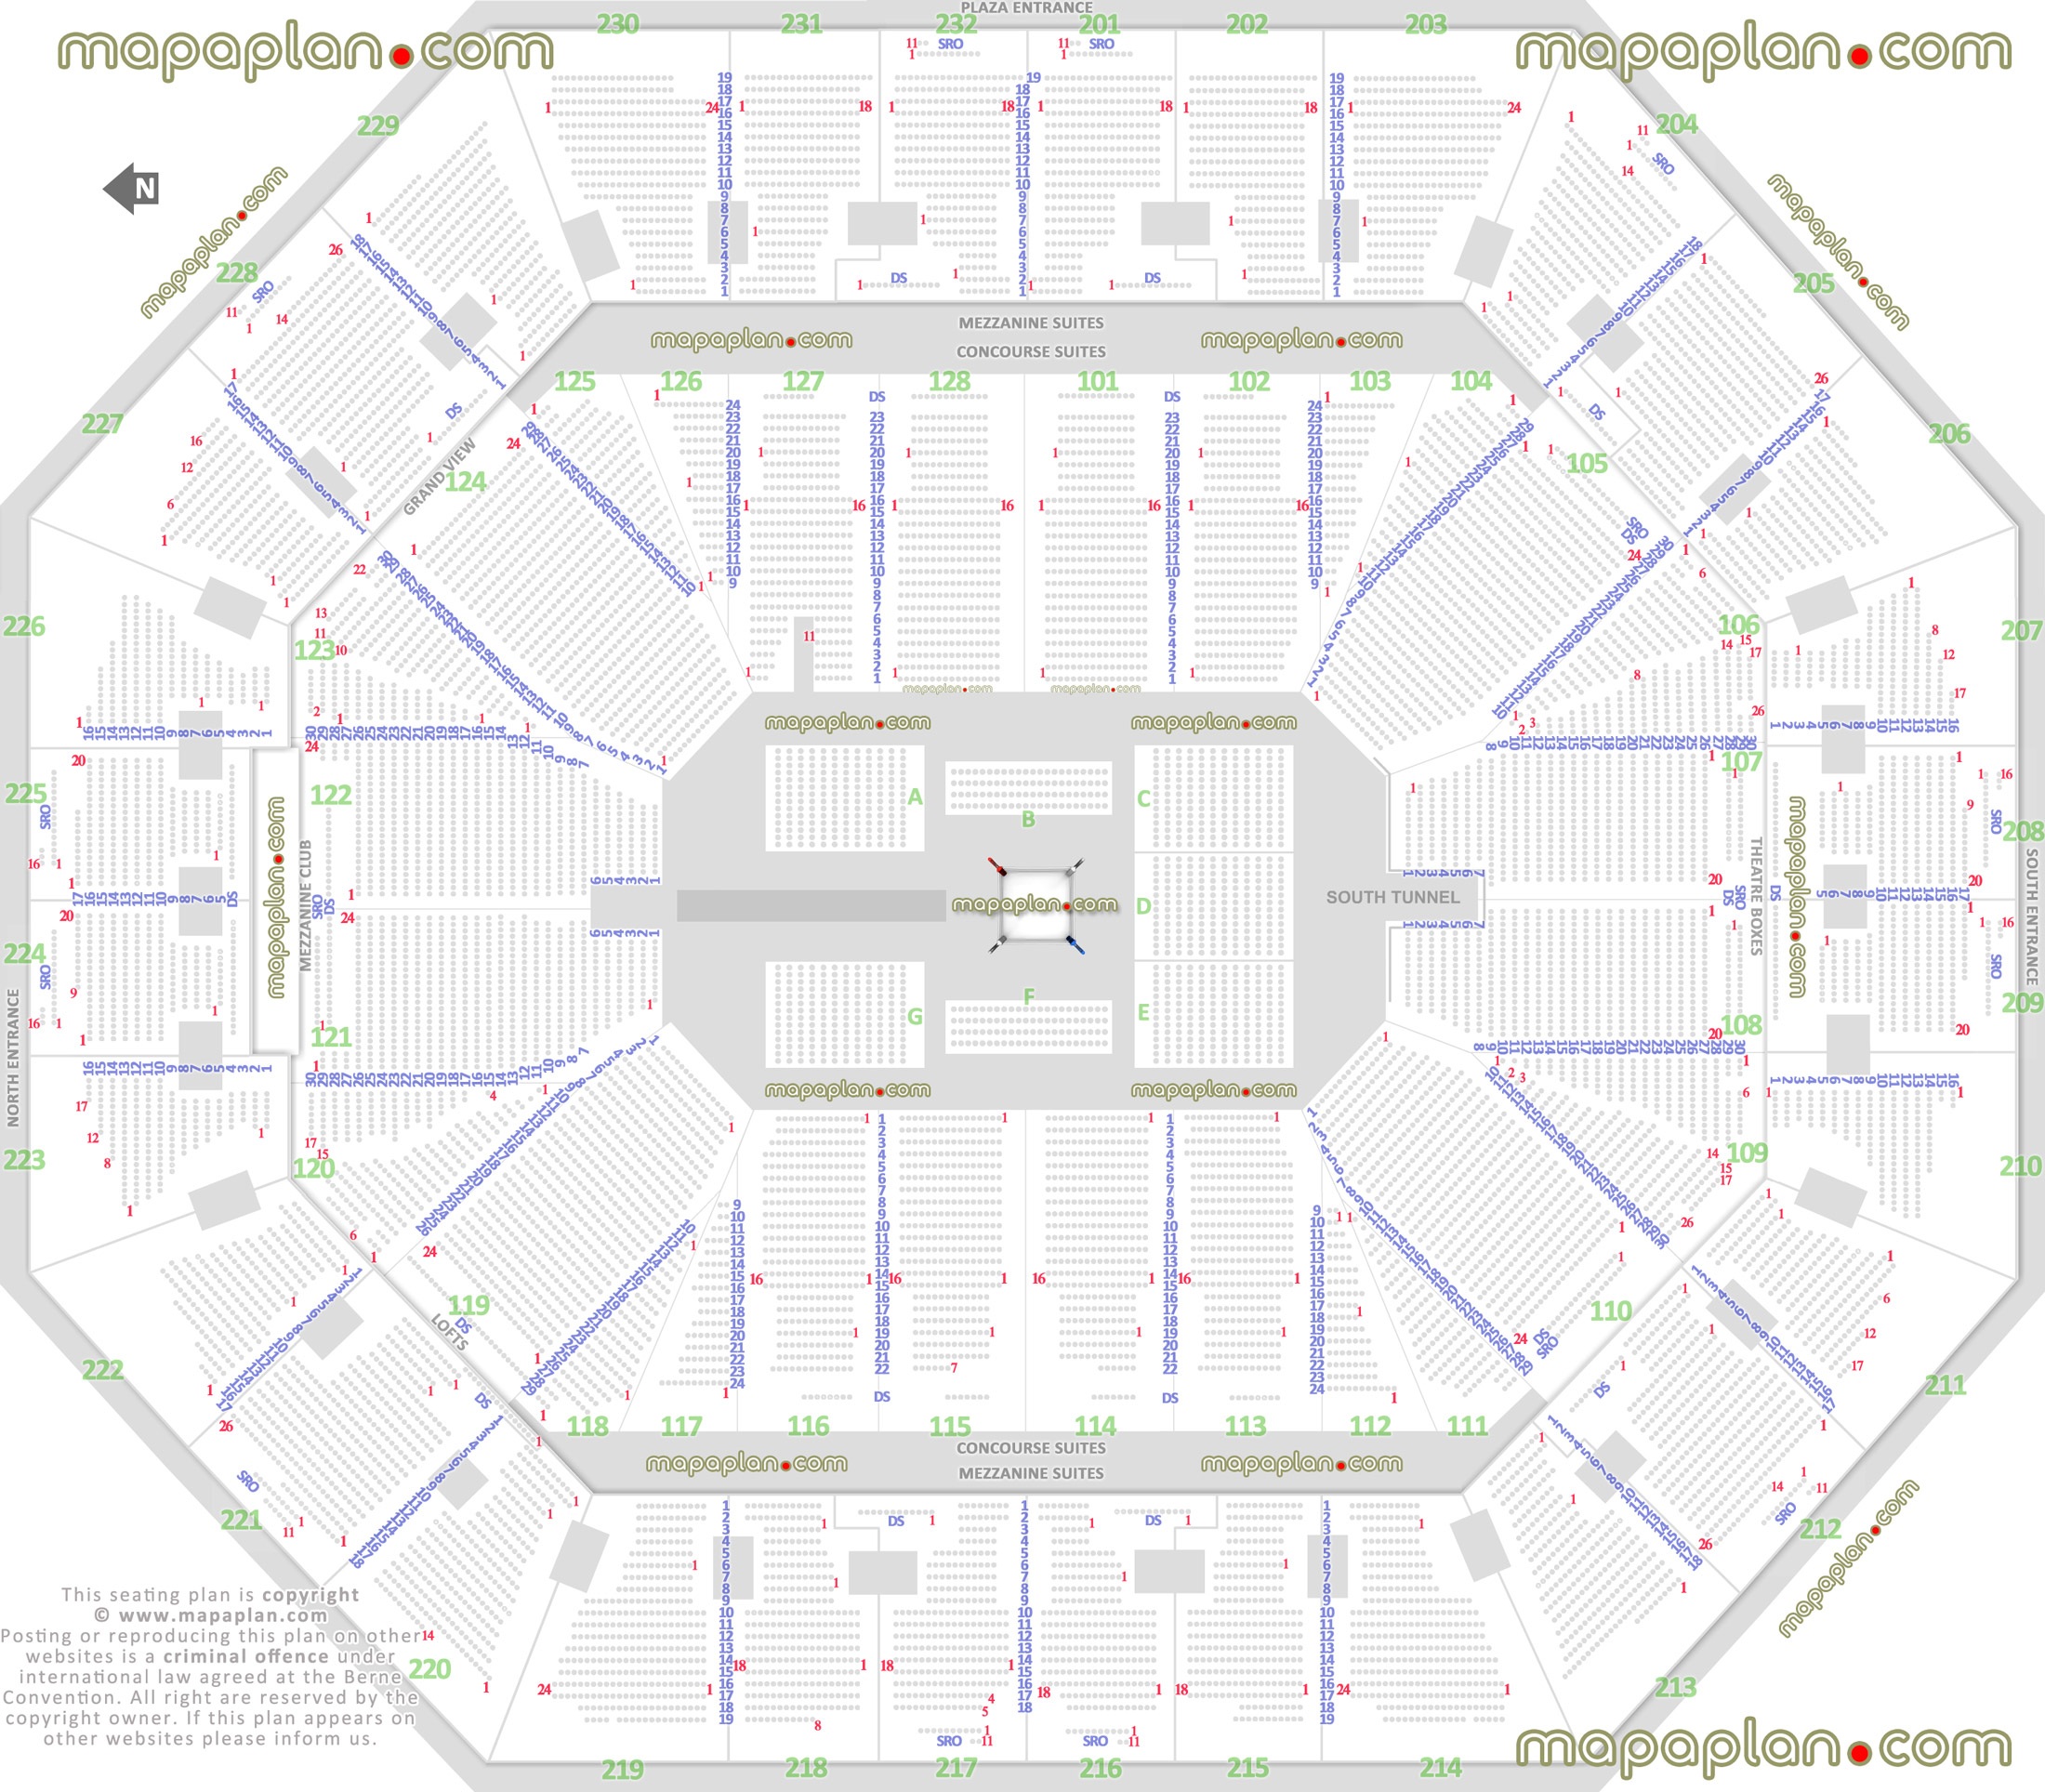 wwe wrestling boxing match events map by row 360 round ring floor configuration how many rows sections 201 202 203 204 205 206 207 208 209 210 211 212 213 214 215 216 217 218 219 220 221 222 223 224 225 226 227 228 229 230 231 232 Oakland Oracle Arena seating chart